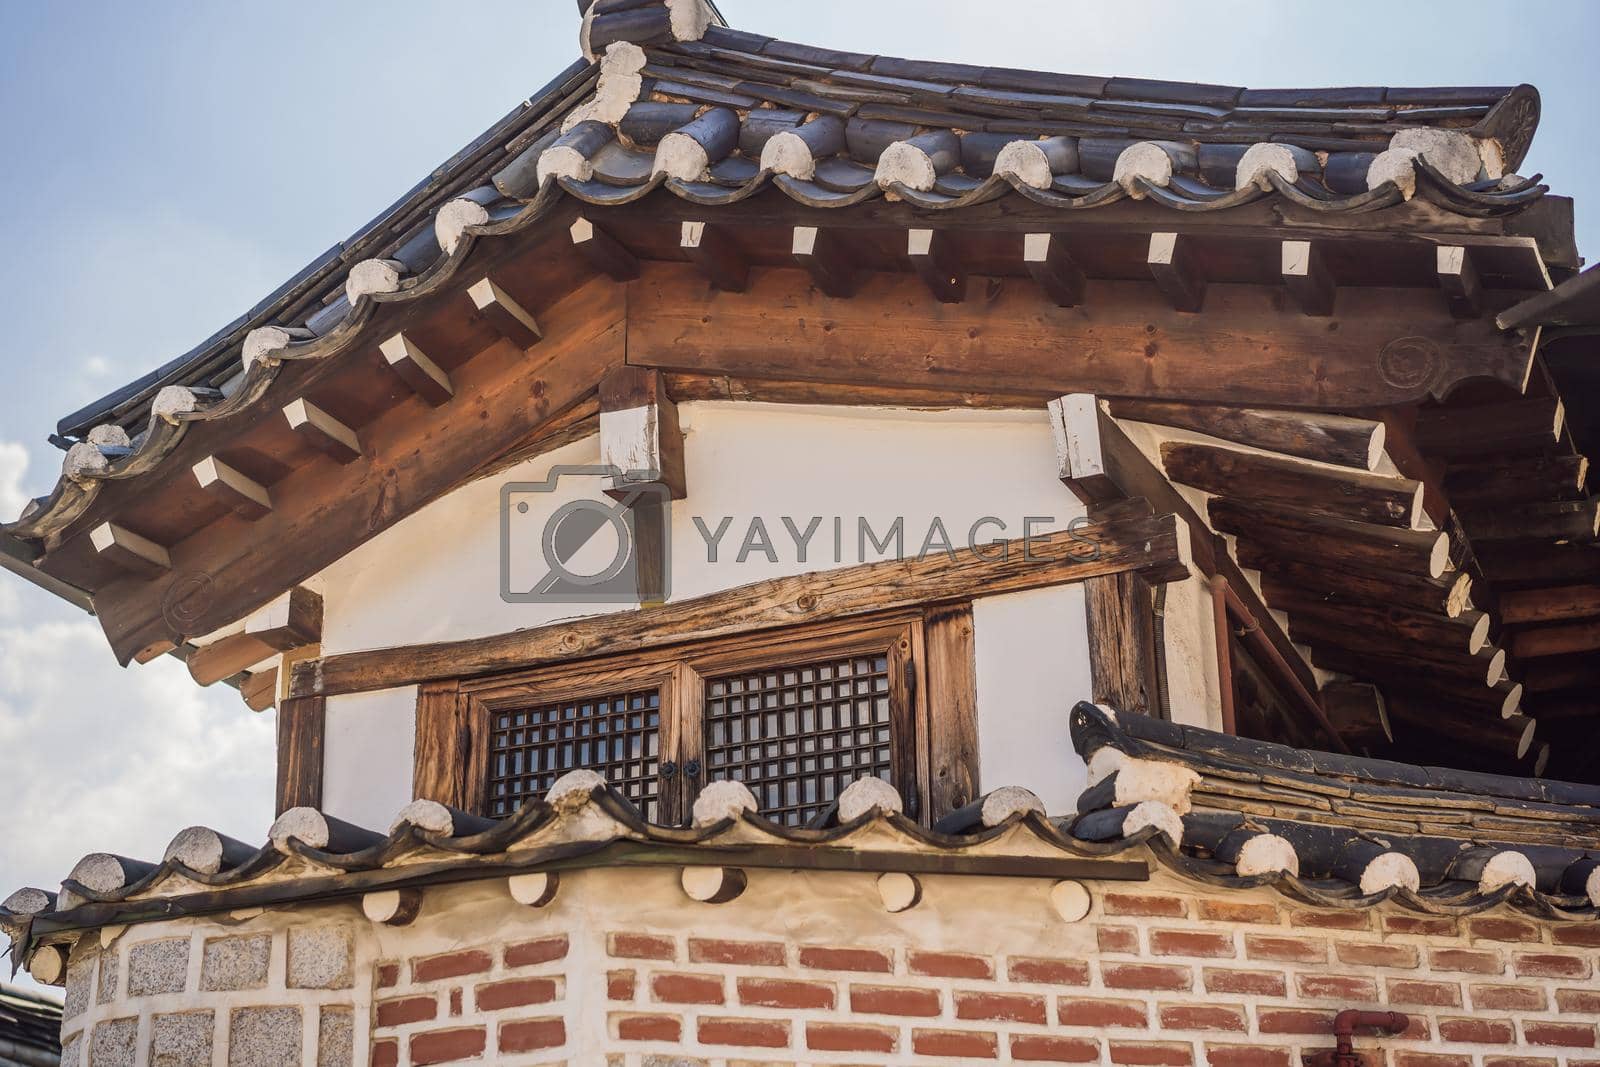 Royalty free image of Bukchon Hanok Village is one of the famous place for Korean traditional houses have been preserved by galitskaya